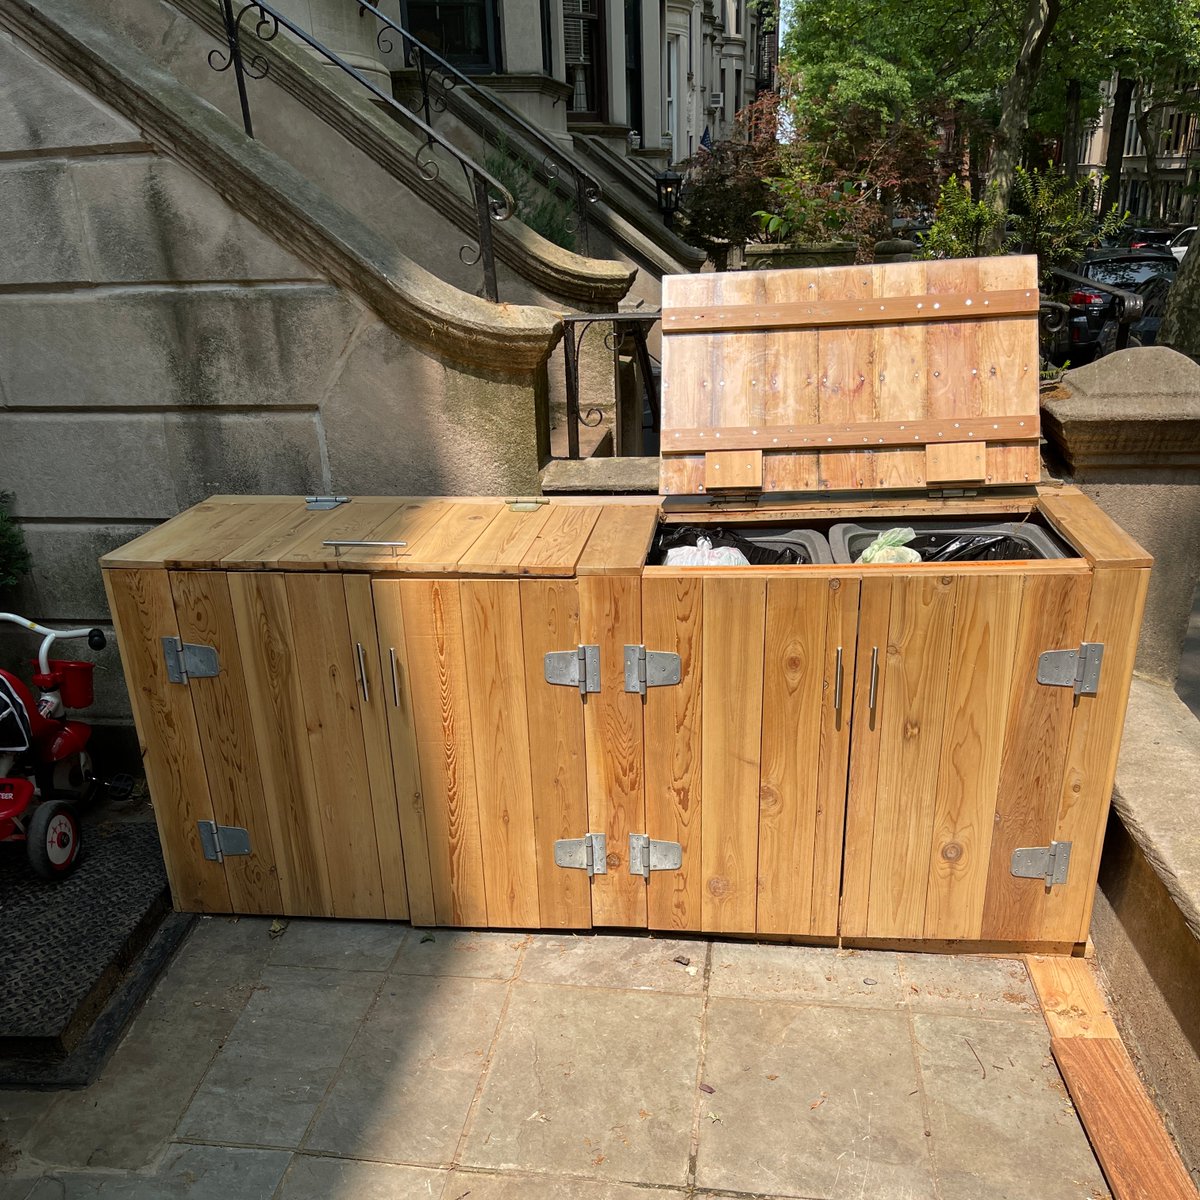 #TransformationThursday! ✨
A broken wooden enclosure replaced by a modern, durable 3-Module CITIBIN in Small size.
Send us a DM to get your trash transformation started📥
#citibin #transformationthursday #trashneverlookedsostylish #ratshatecitibin #smallbusiness #nyc